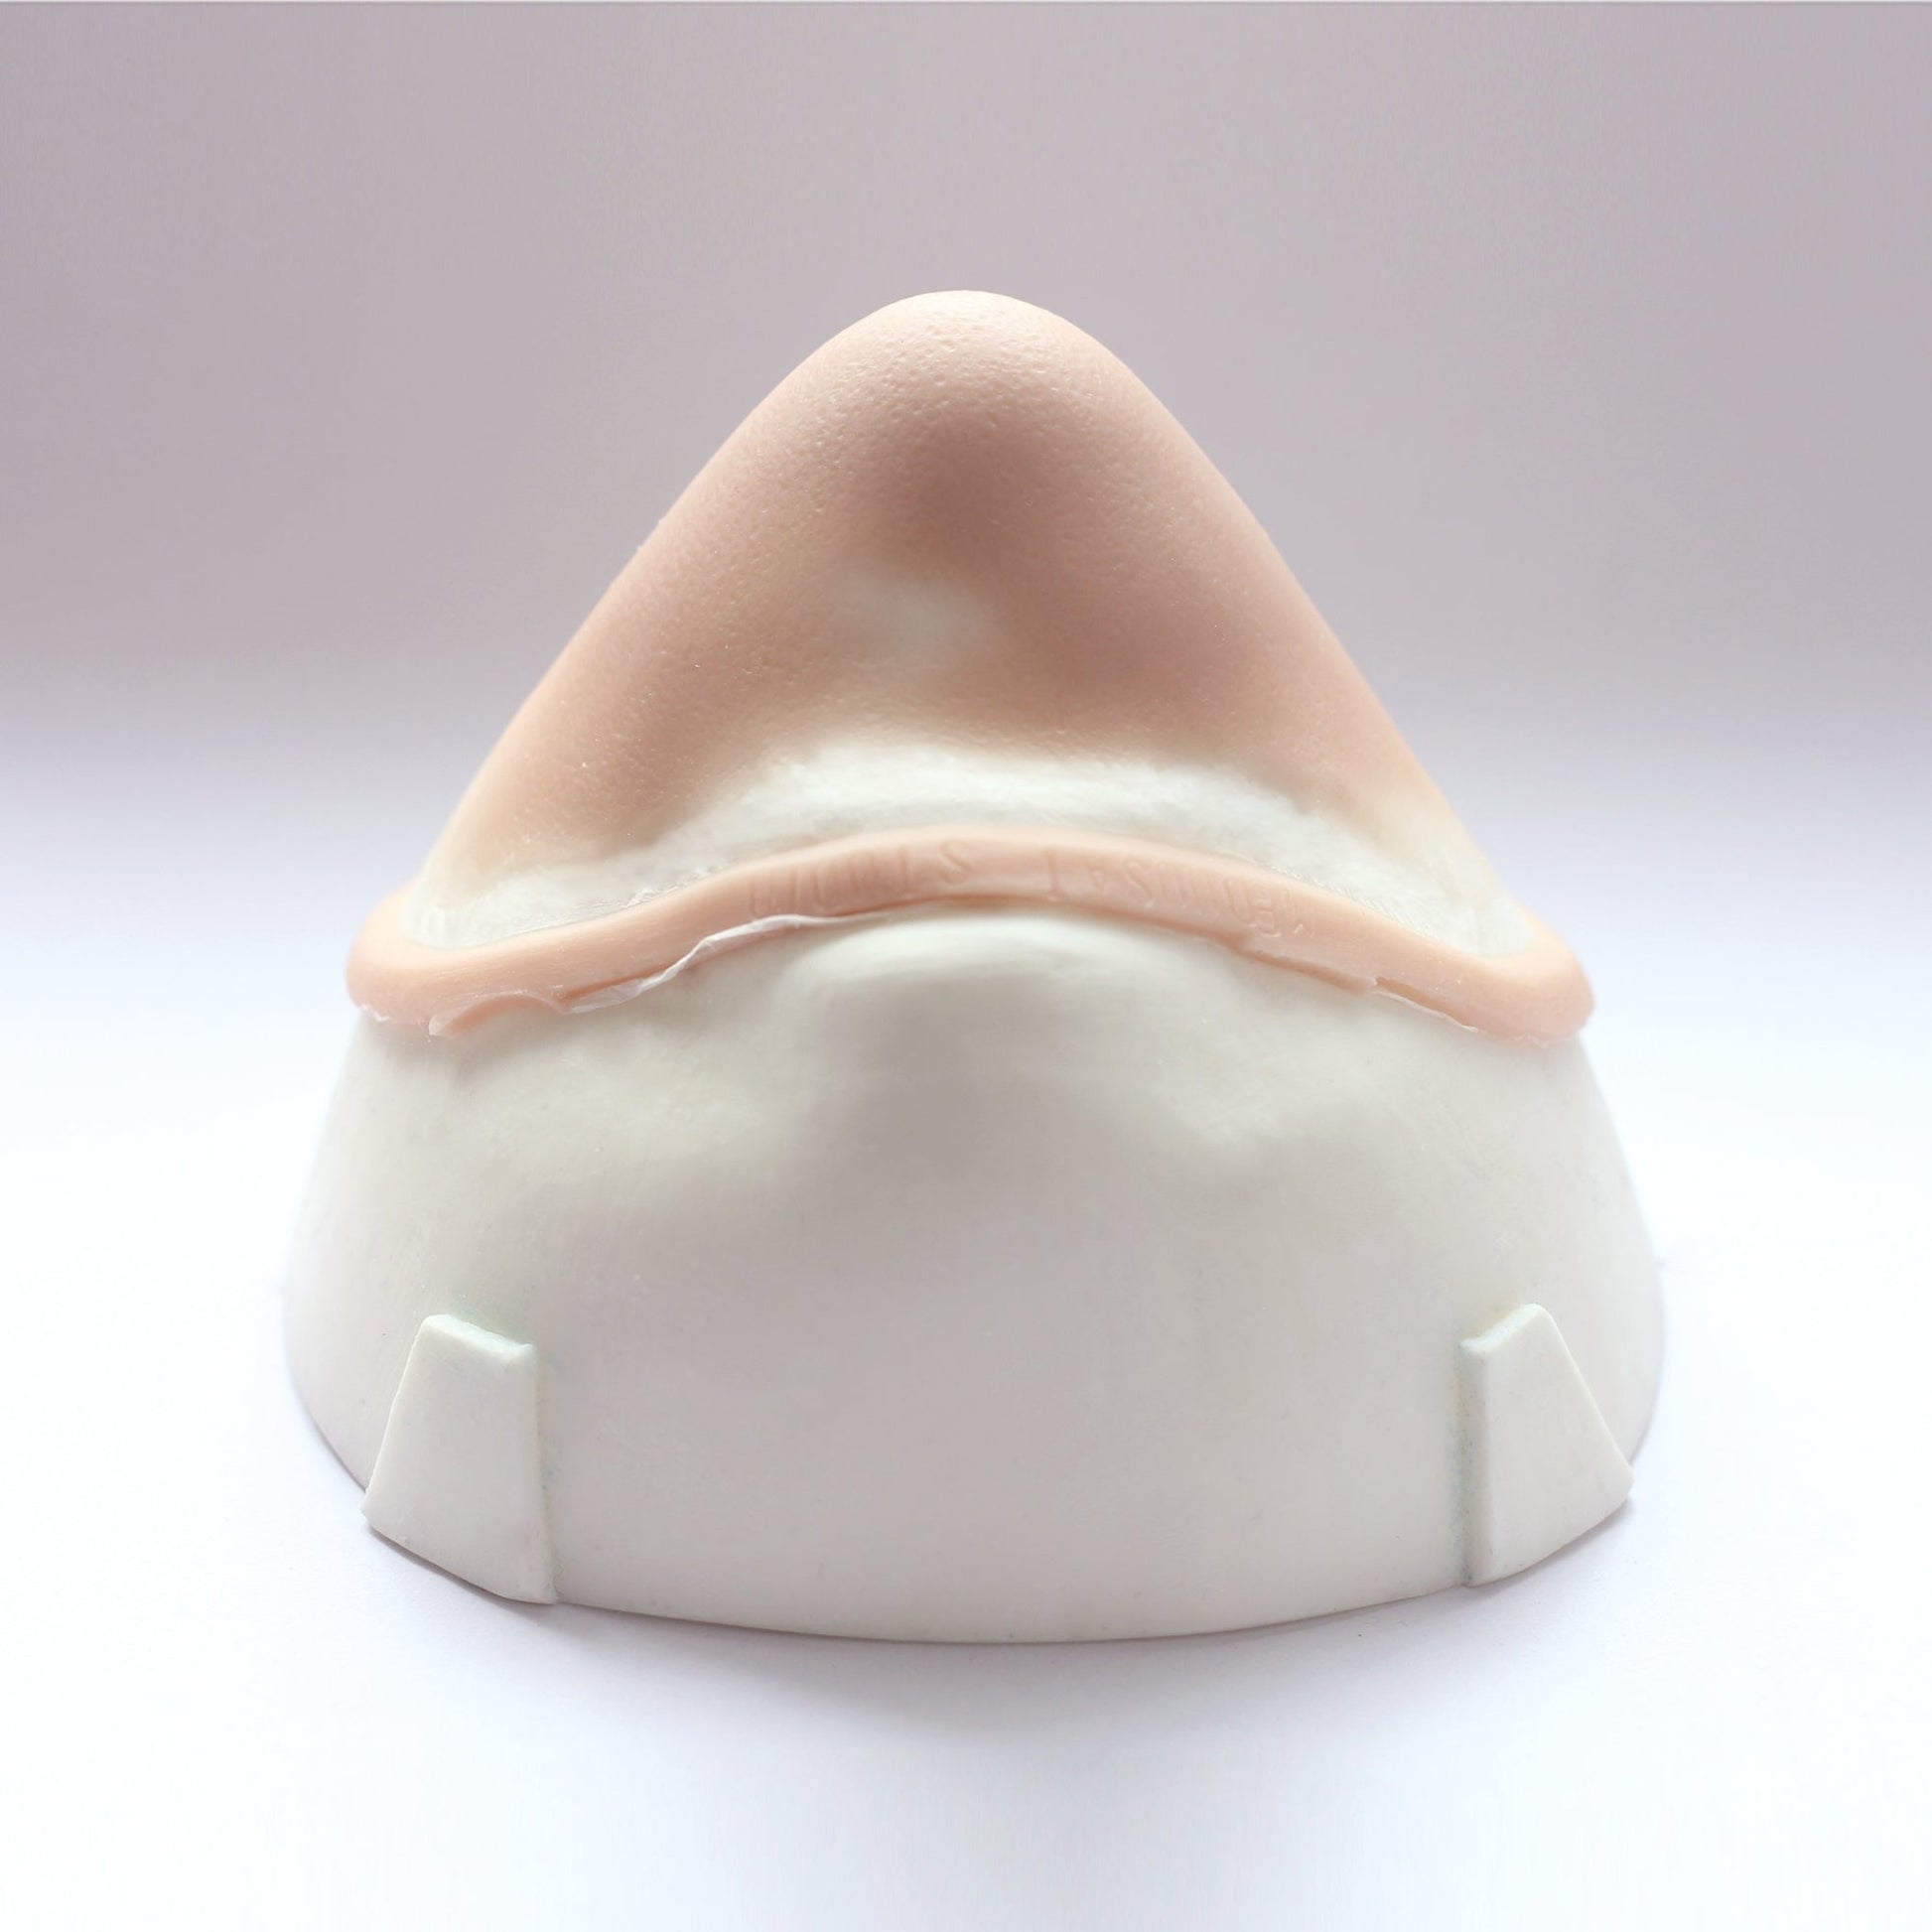 Pointy Chin - Silicone makeup prosthetic in vanilla shade on a white surface